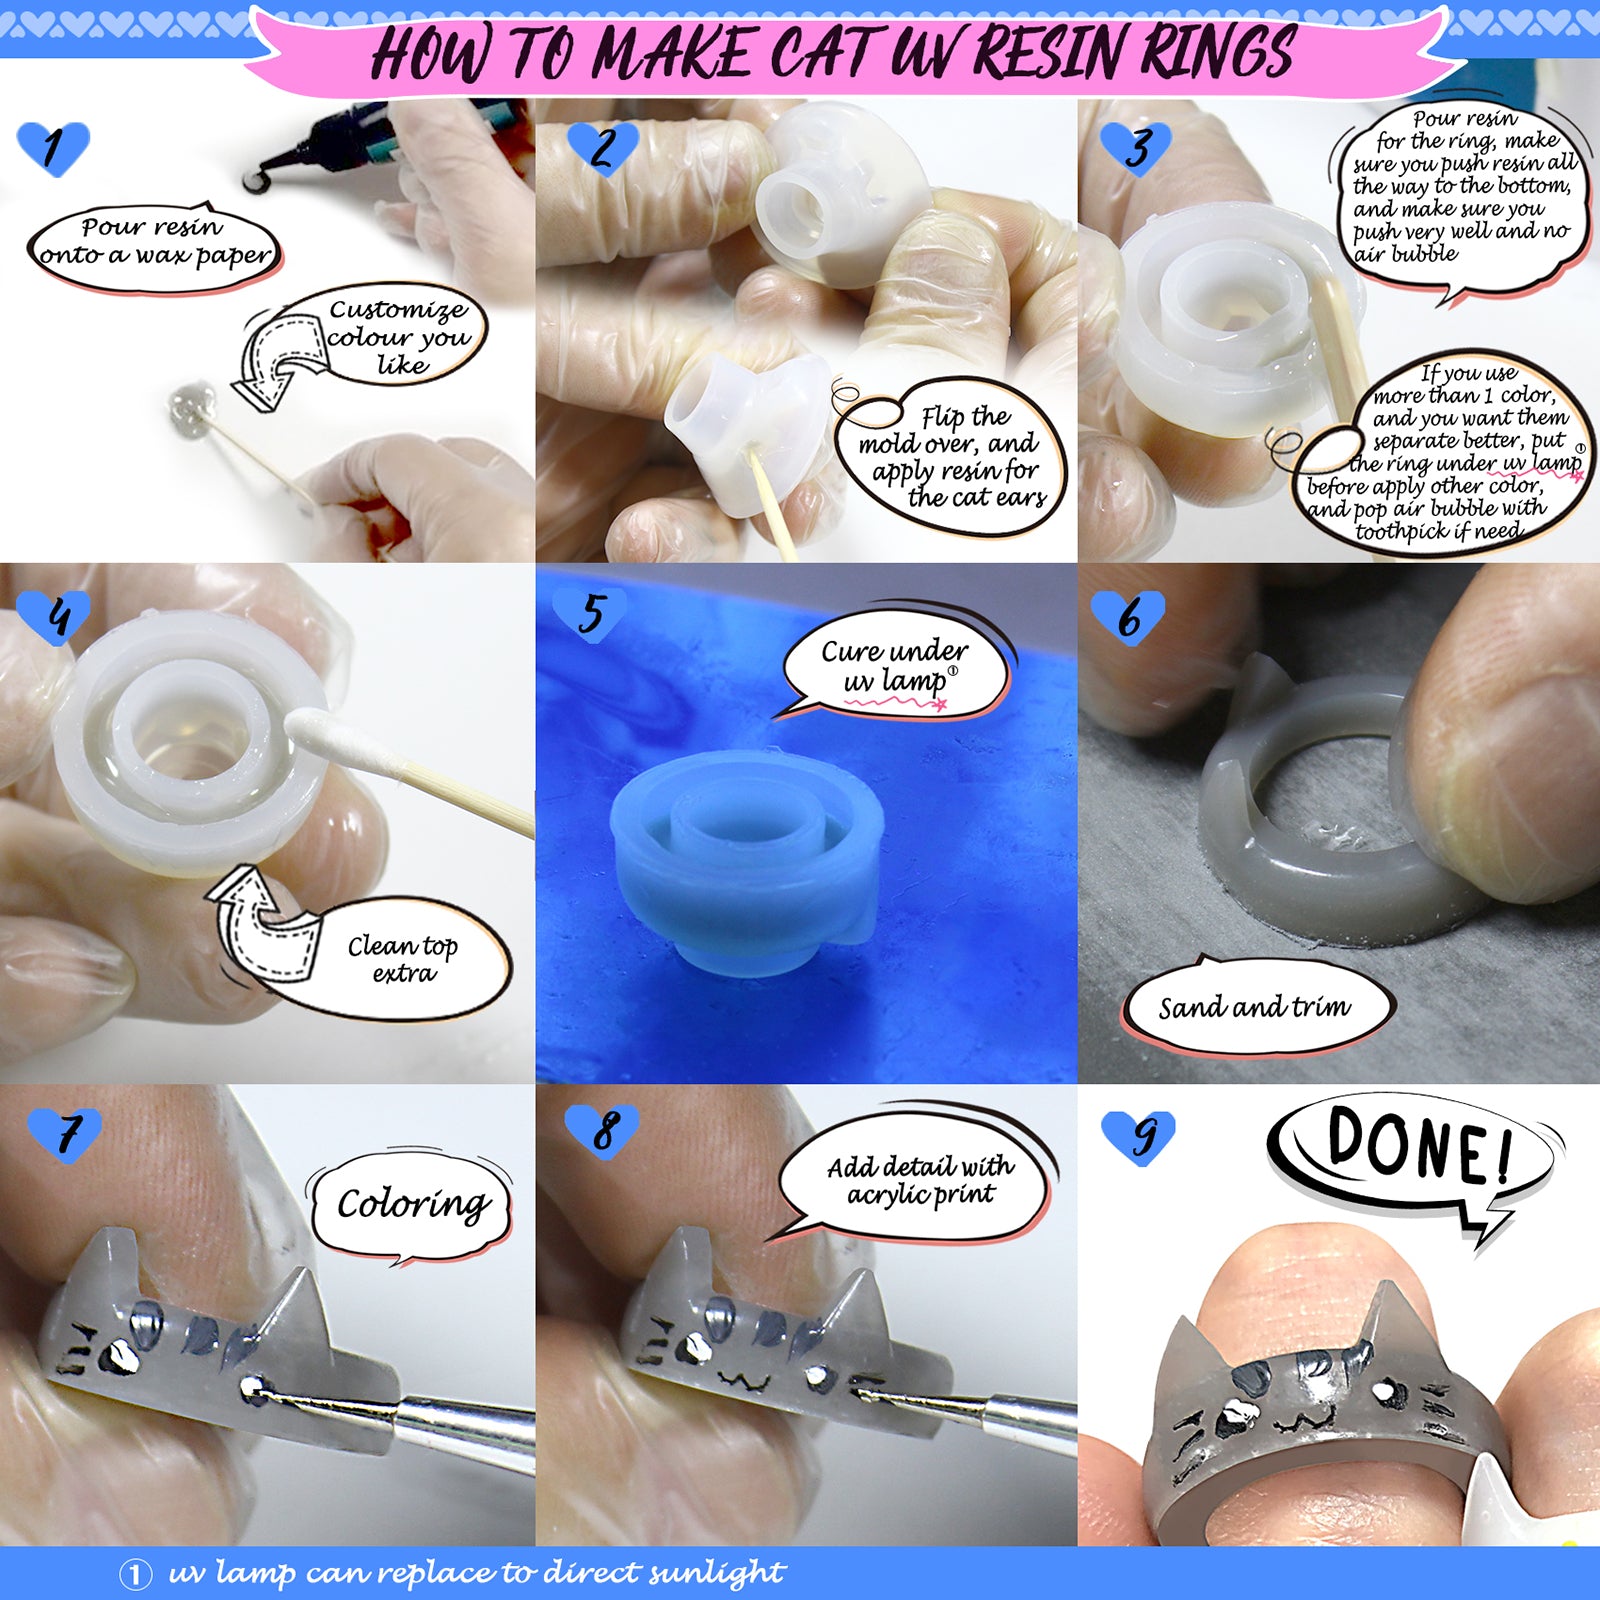 how to make resin rings